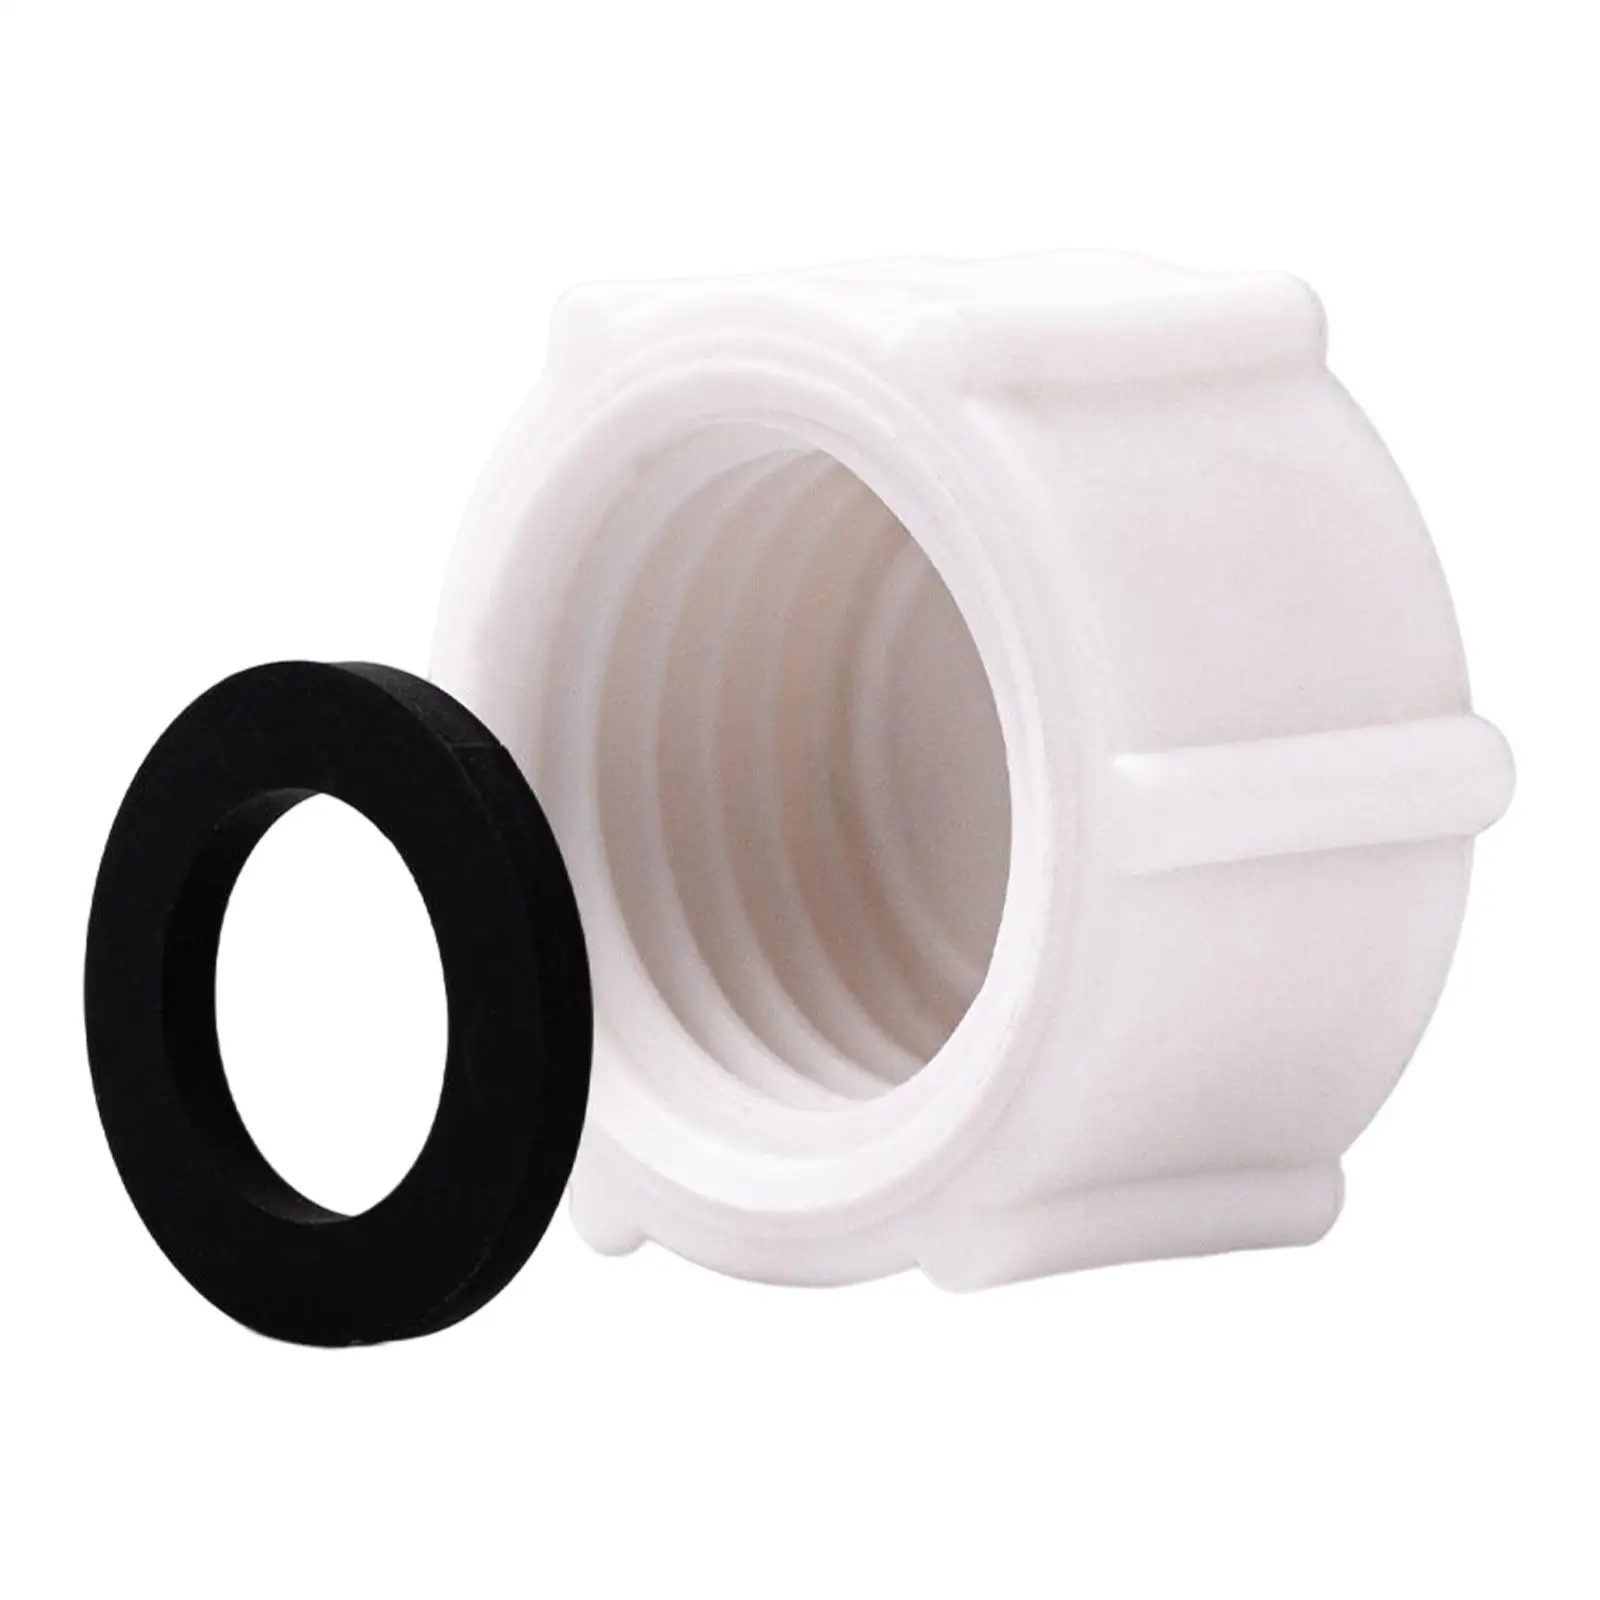 Pool Drain Cap Parts with O Rings Accessories for Sand Filter Pumps and Combo